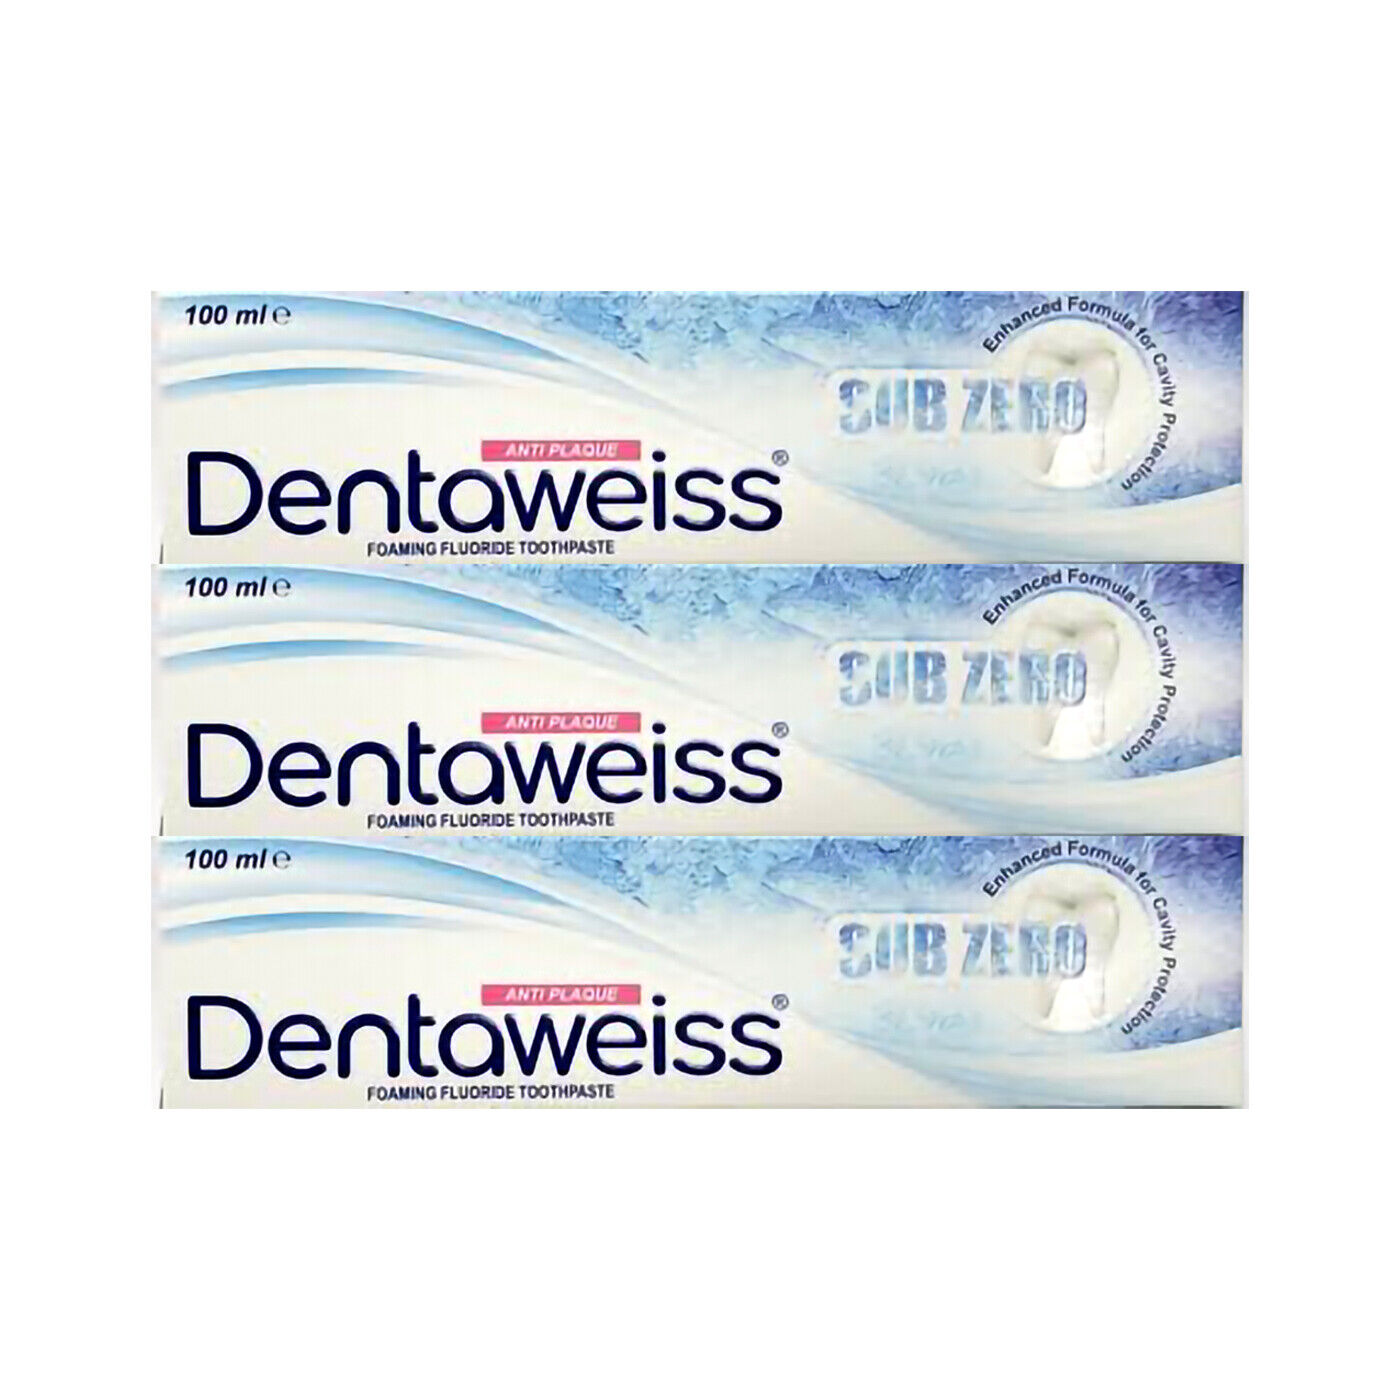 3x Dentaweiss Anti-Plaque Foaming Fluoride Toothpaste Clasic Mint 100ml